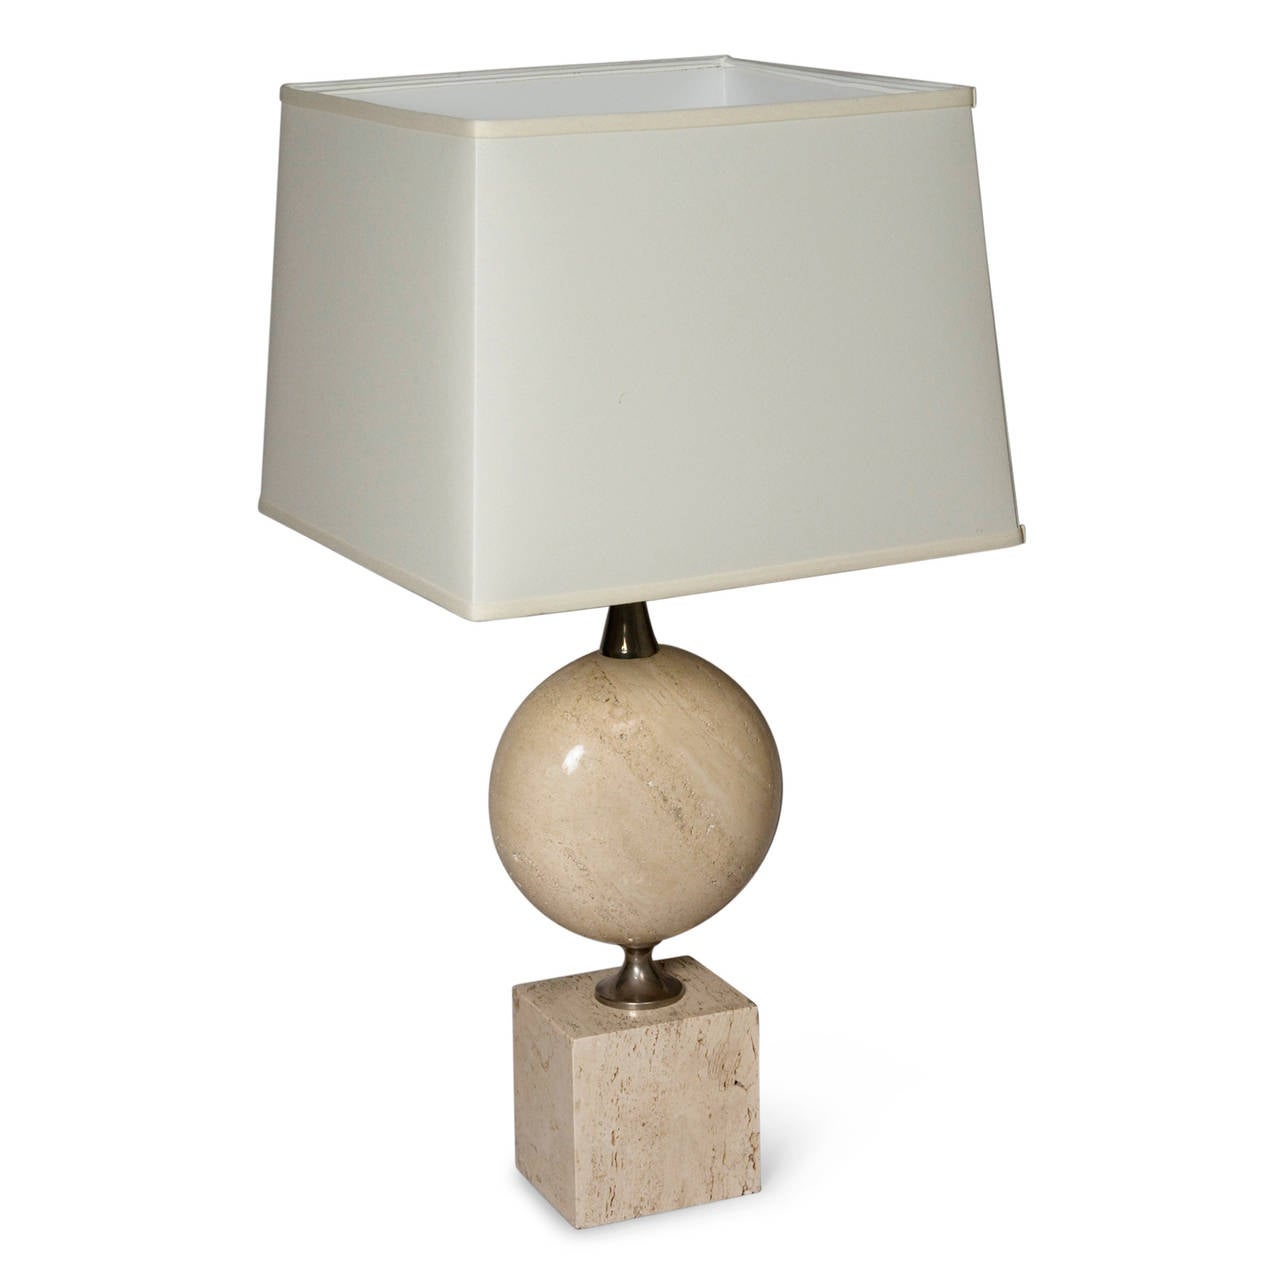 Pair of large polished travertine and chrome table lamps, the travertine cube shaped base separated from a disc shaped travertine element by chrome connectors, in custom silk shade, by Maison Barbier, French 1970s. Overall height 32 1/4 in, Shade